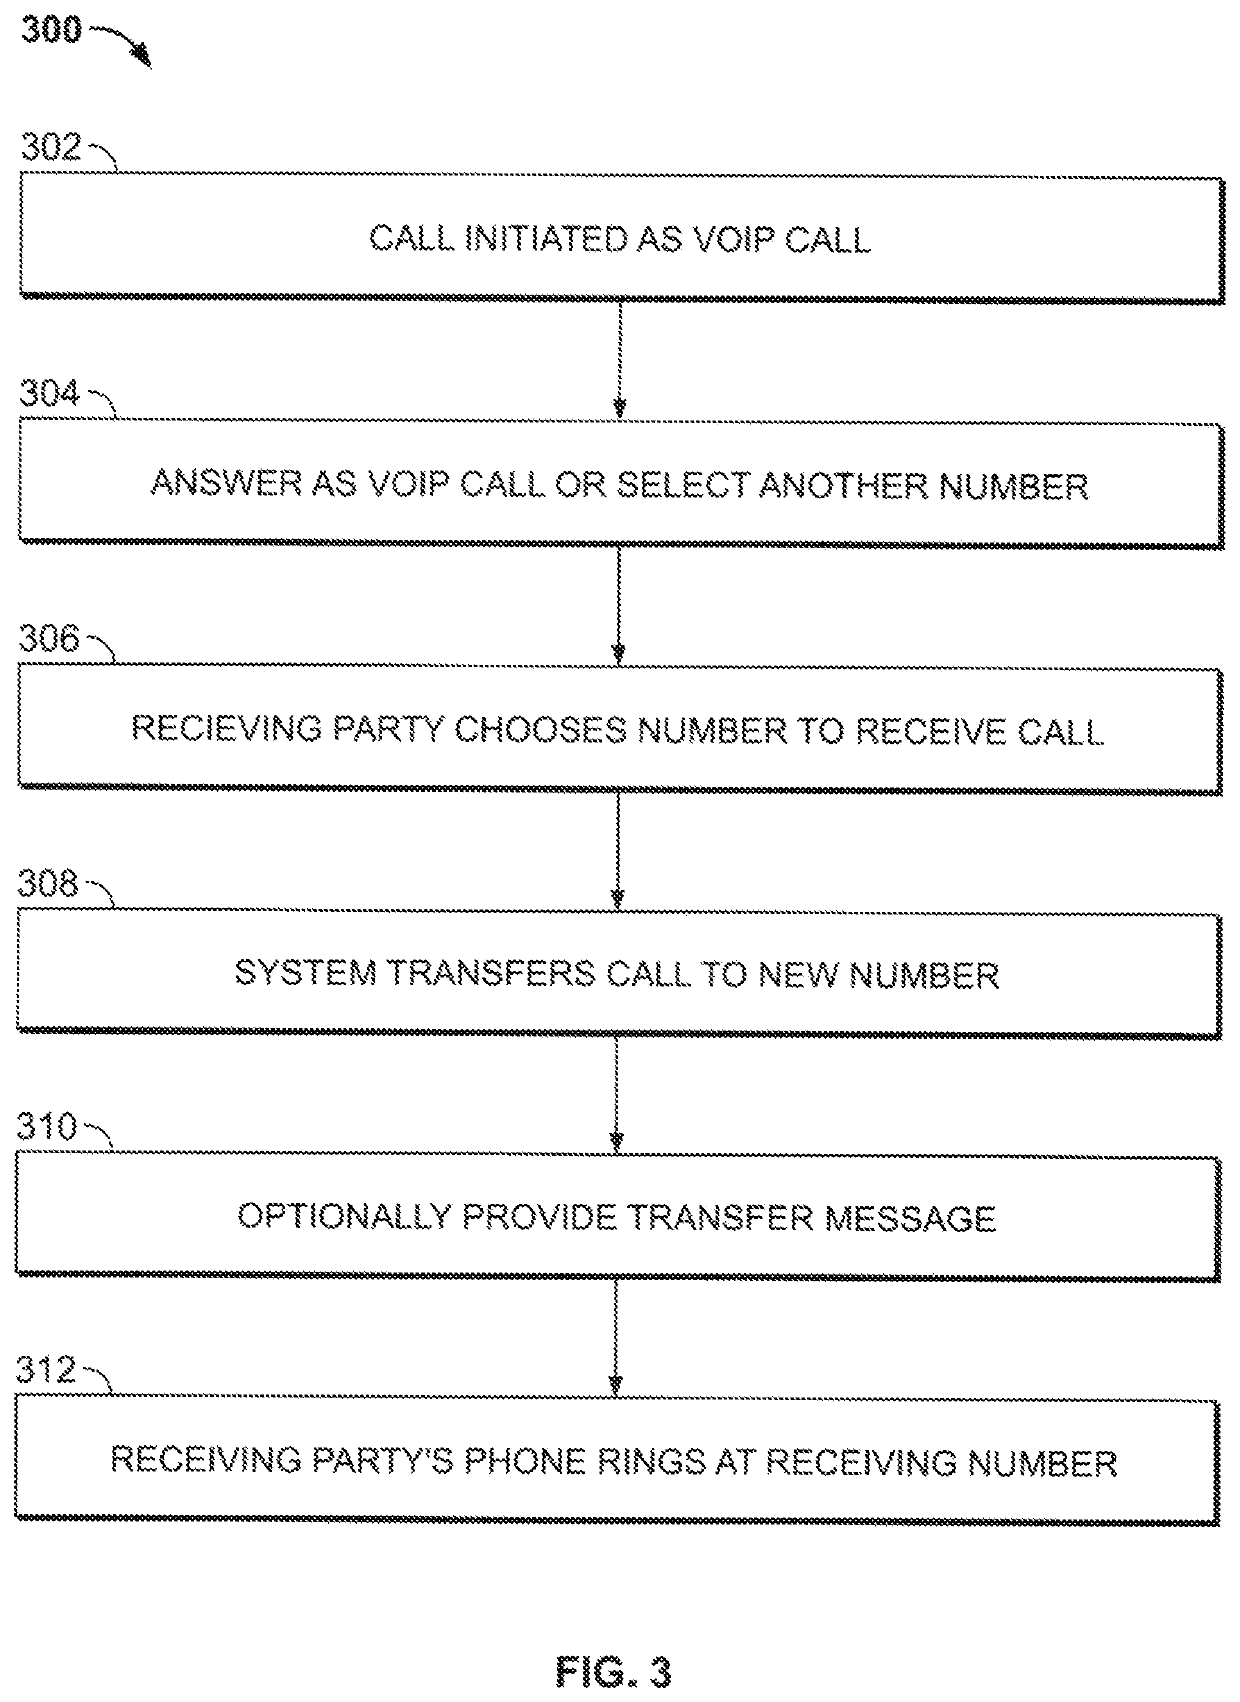 Systems and Methods for Communications & Commerce Between System Users and Non-System Users